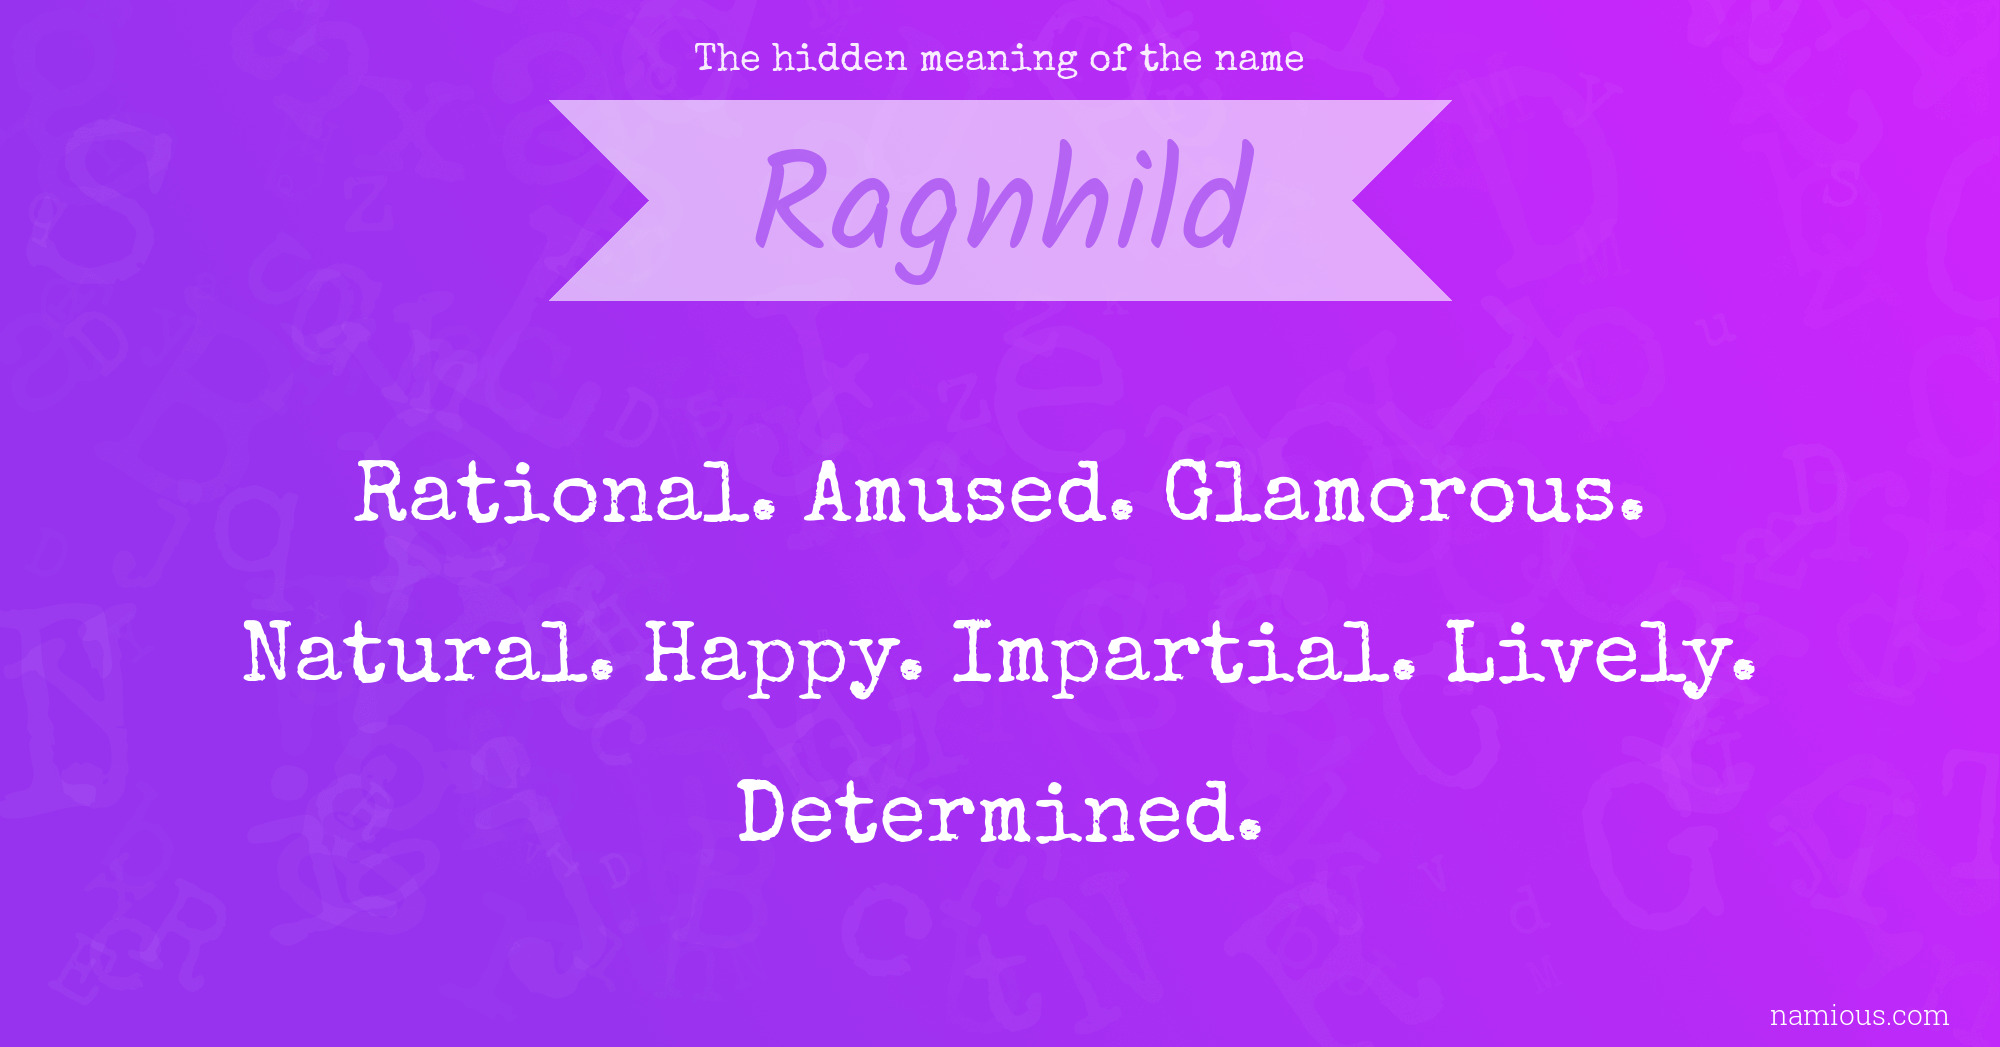 The hidden meaning of the name Ragnhild